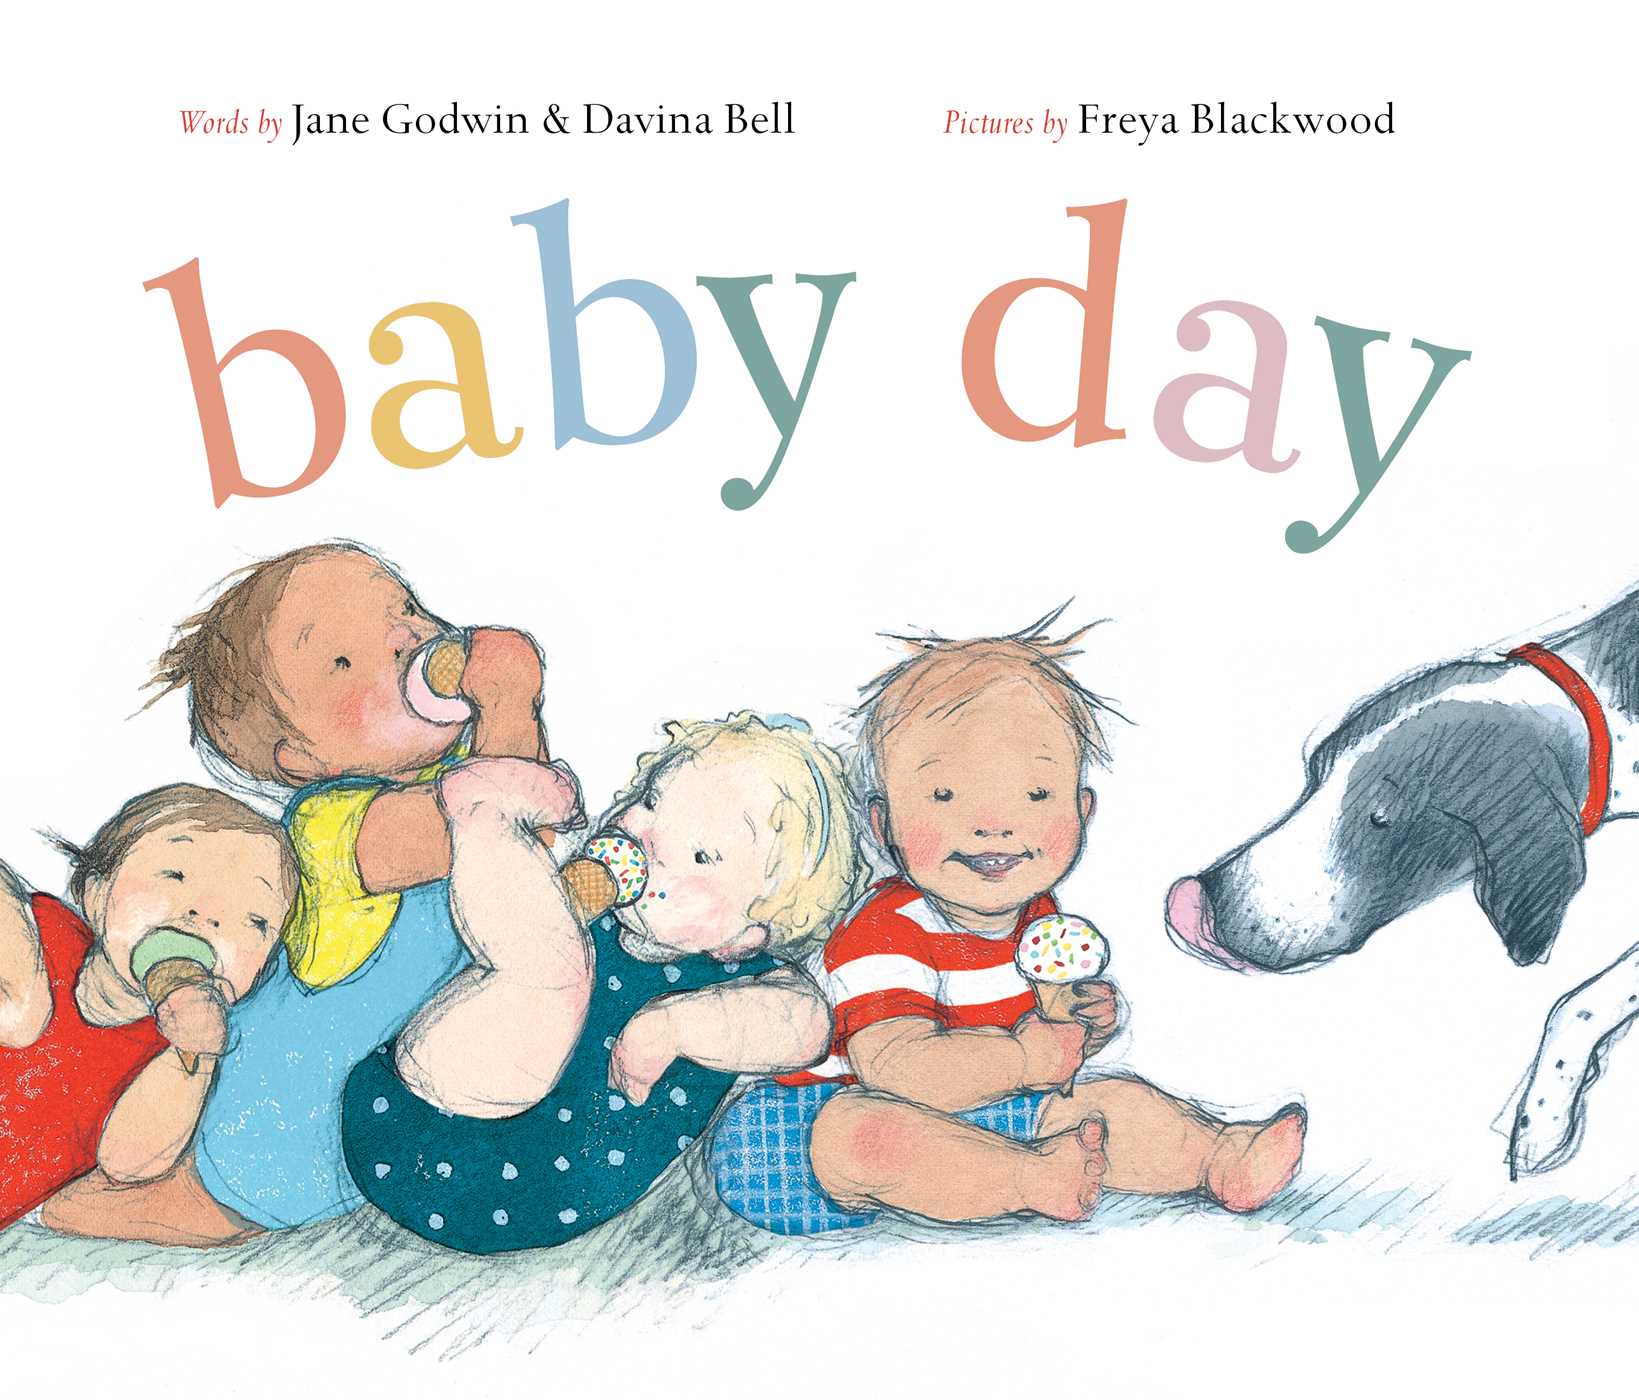 cover of the book "baby day" featuring four babies of various skin tones and a black and white dog, all eating ice cream